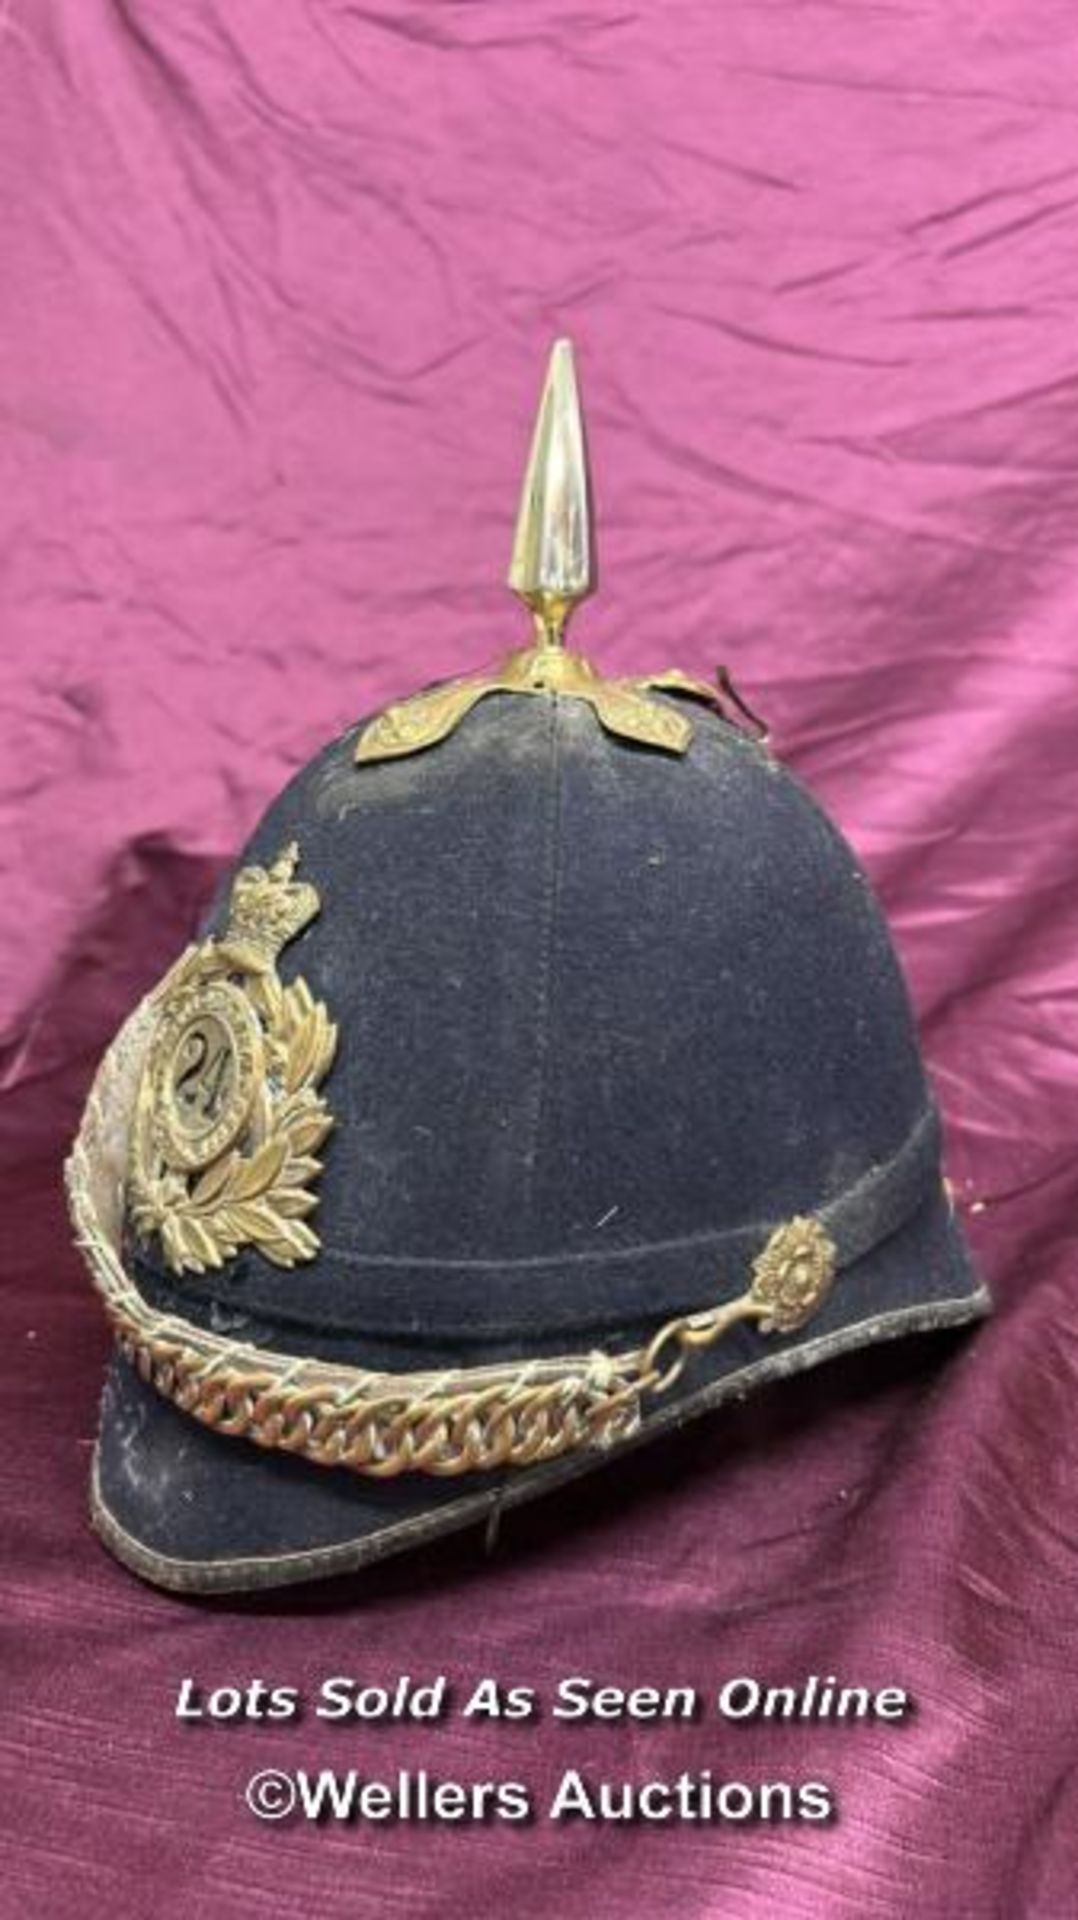 BRITISH HOME SERVICE SPIKED HELMET TO THE 24TH REGIMENT OF FOOT, APPEARS TO BE THEATRICAL - Image 3 of 5